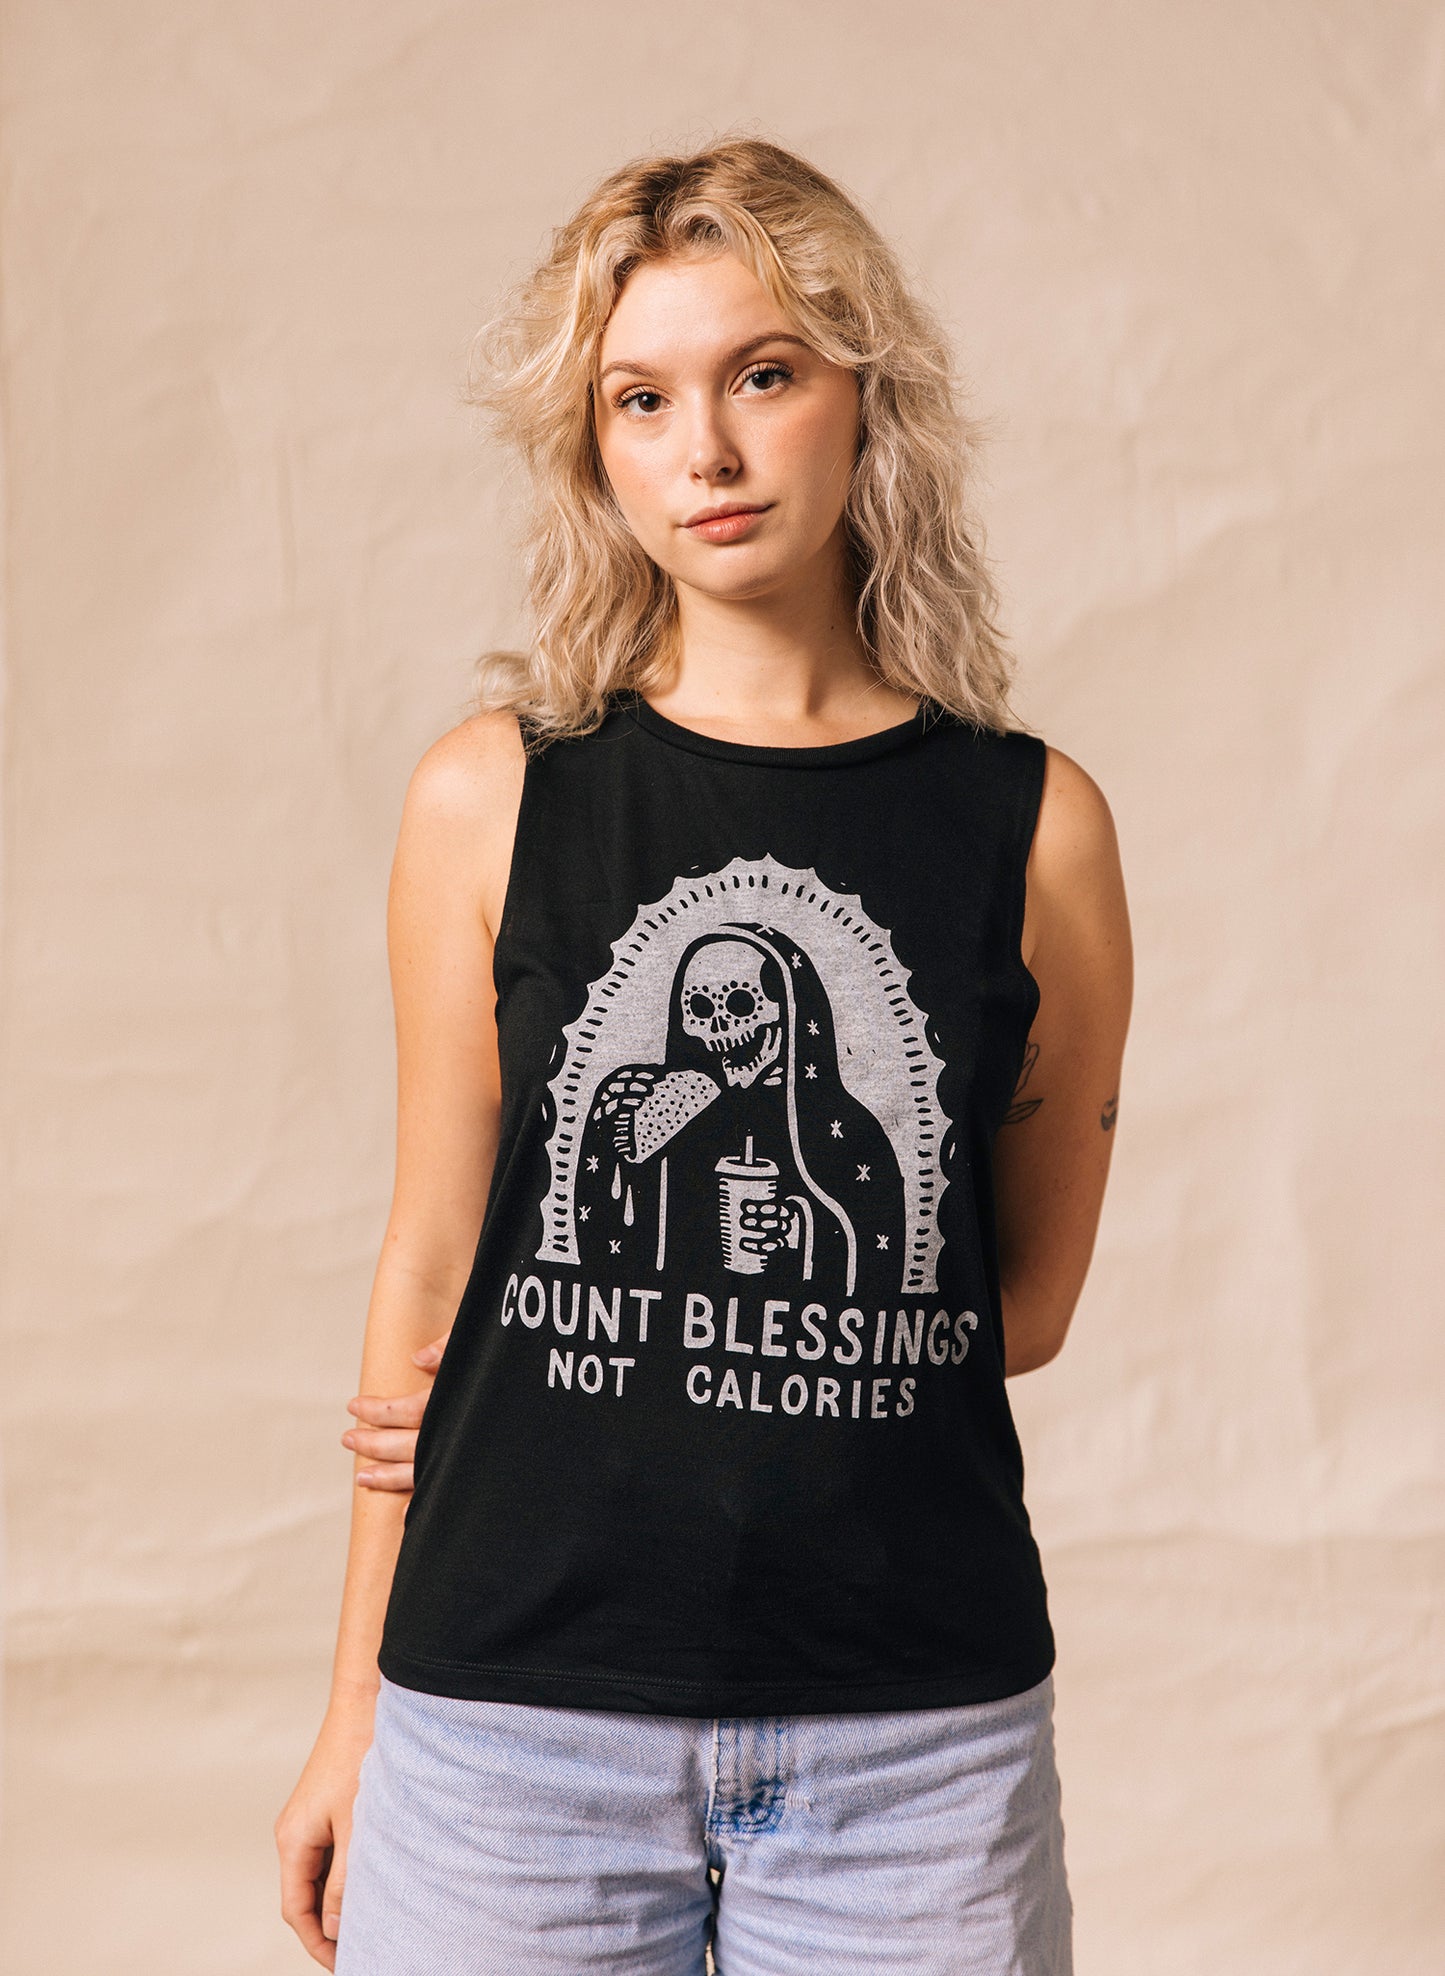 Count Blessings Not Calories Muscle Tee